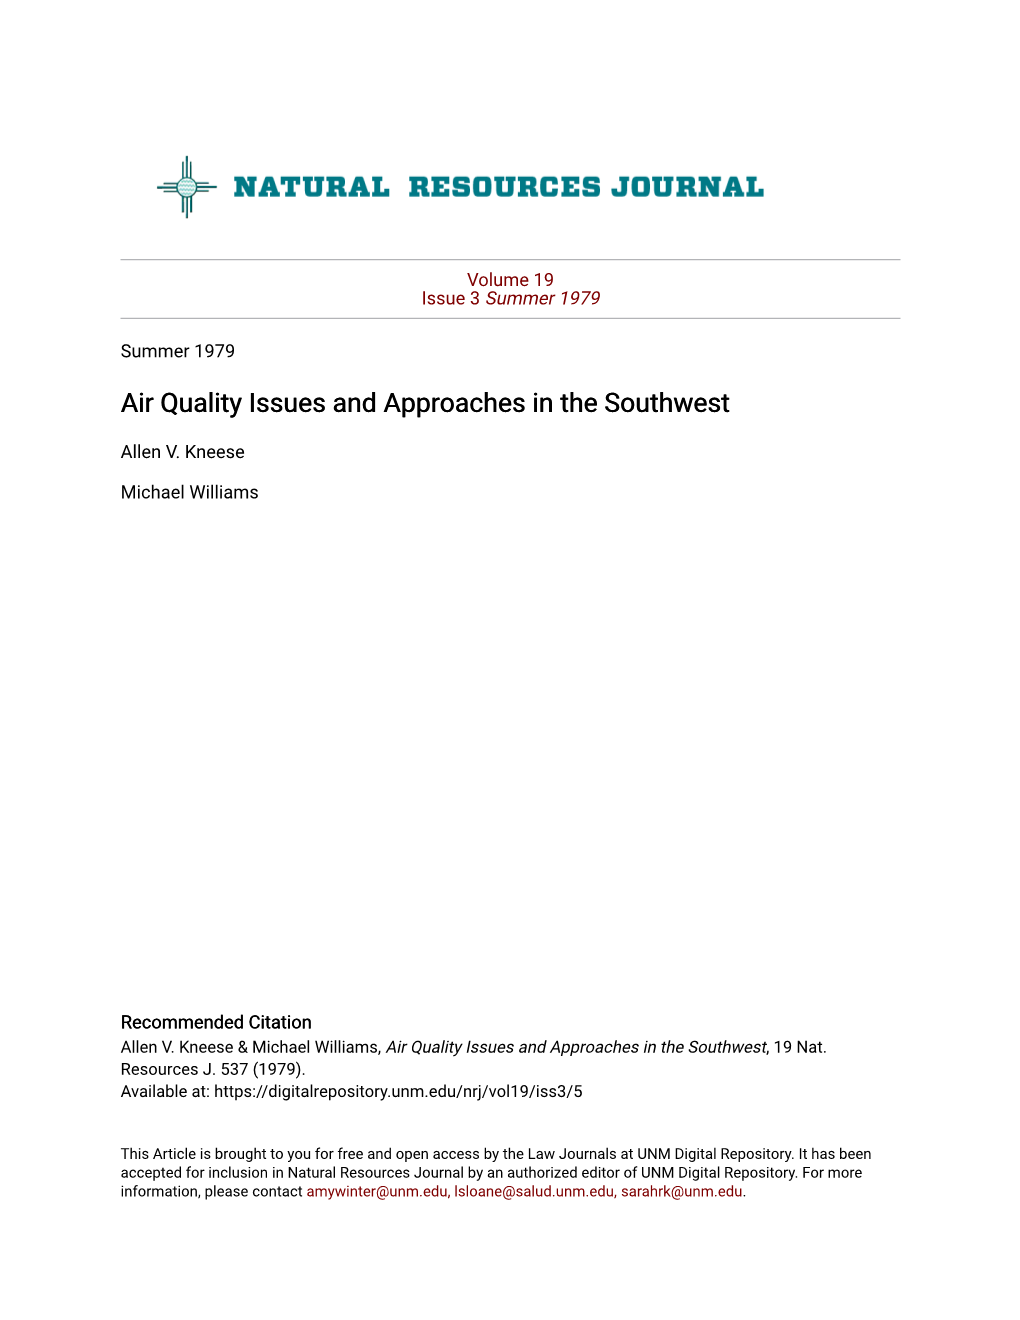 Air Quality Issues and Approaches in the Southwest